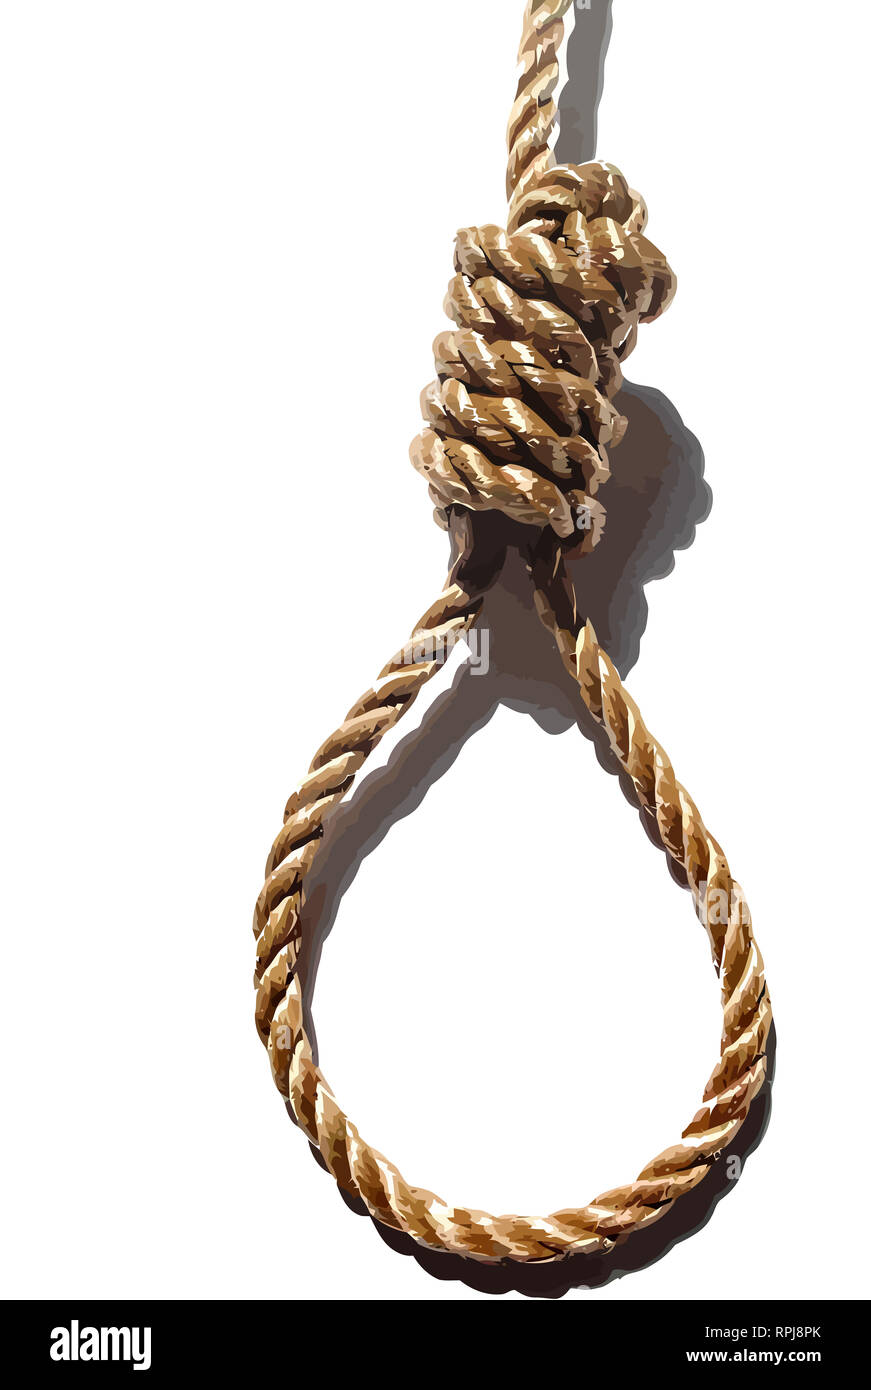 suicide hanging knot noose execution justice illustration Stock Photo